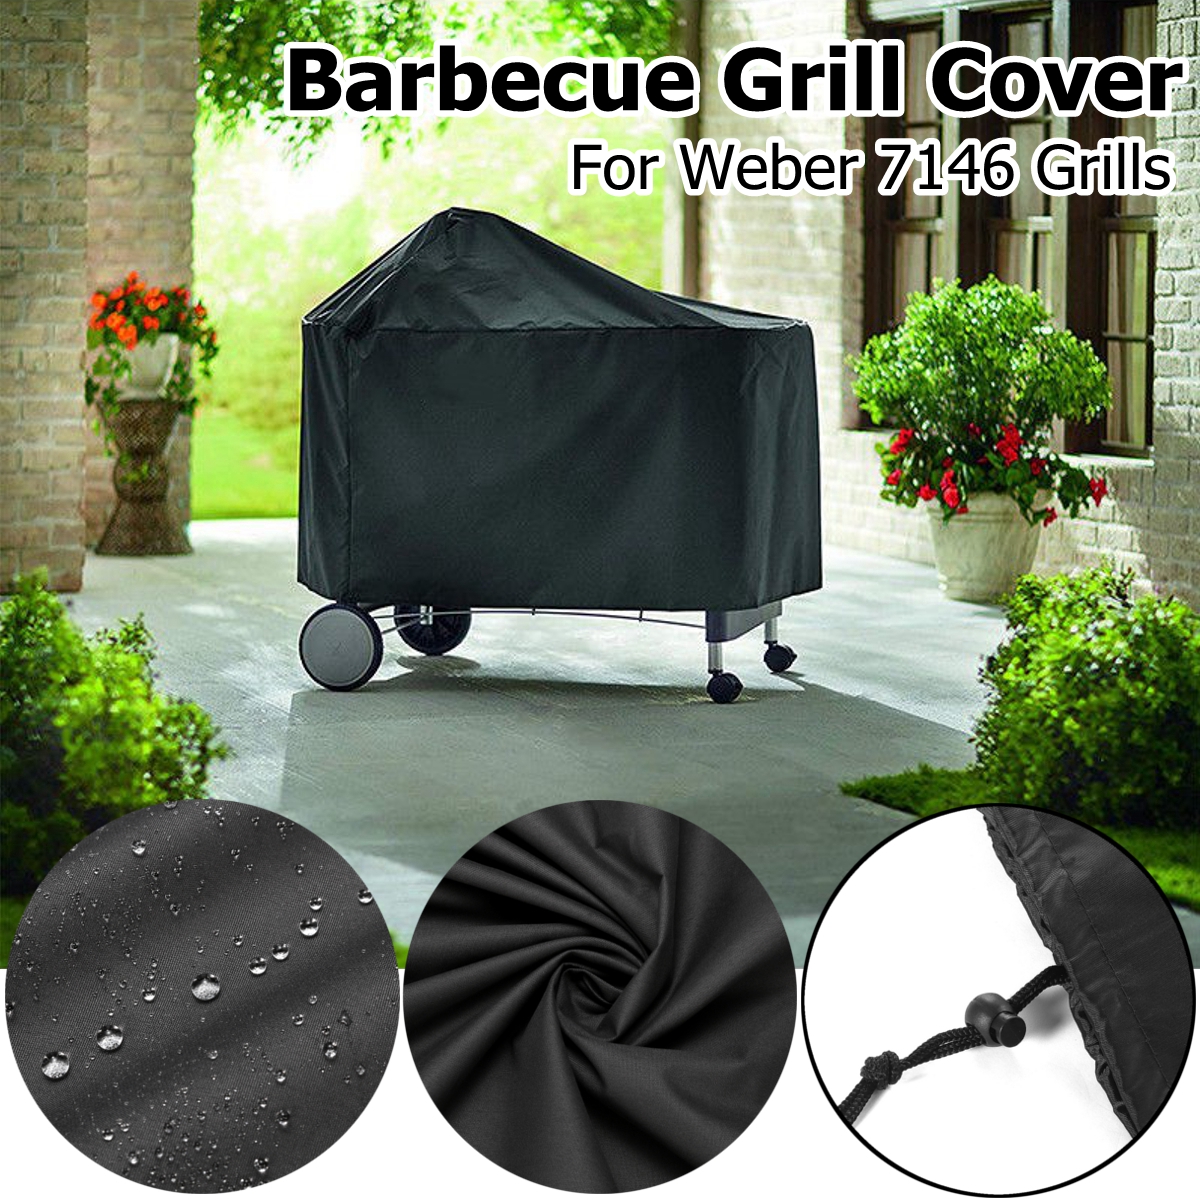 Waterproof-Barbecue-Grill-Cover-for-Weber-7146-Performer-Premium-and-Deluxe-1576280-3